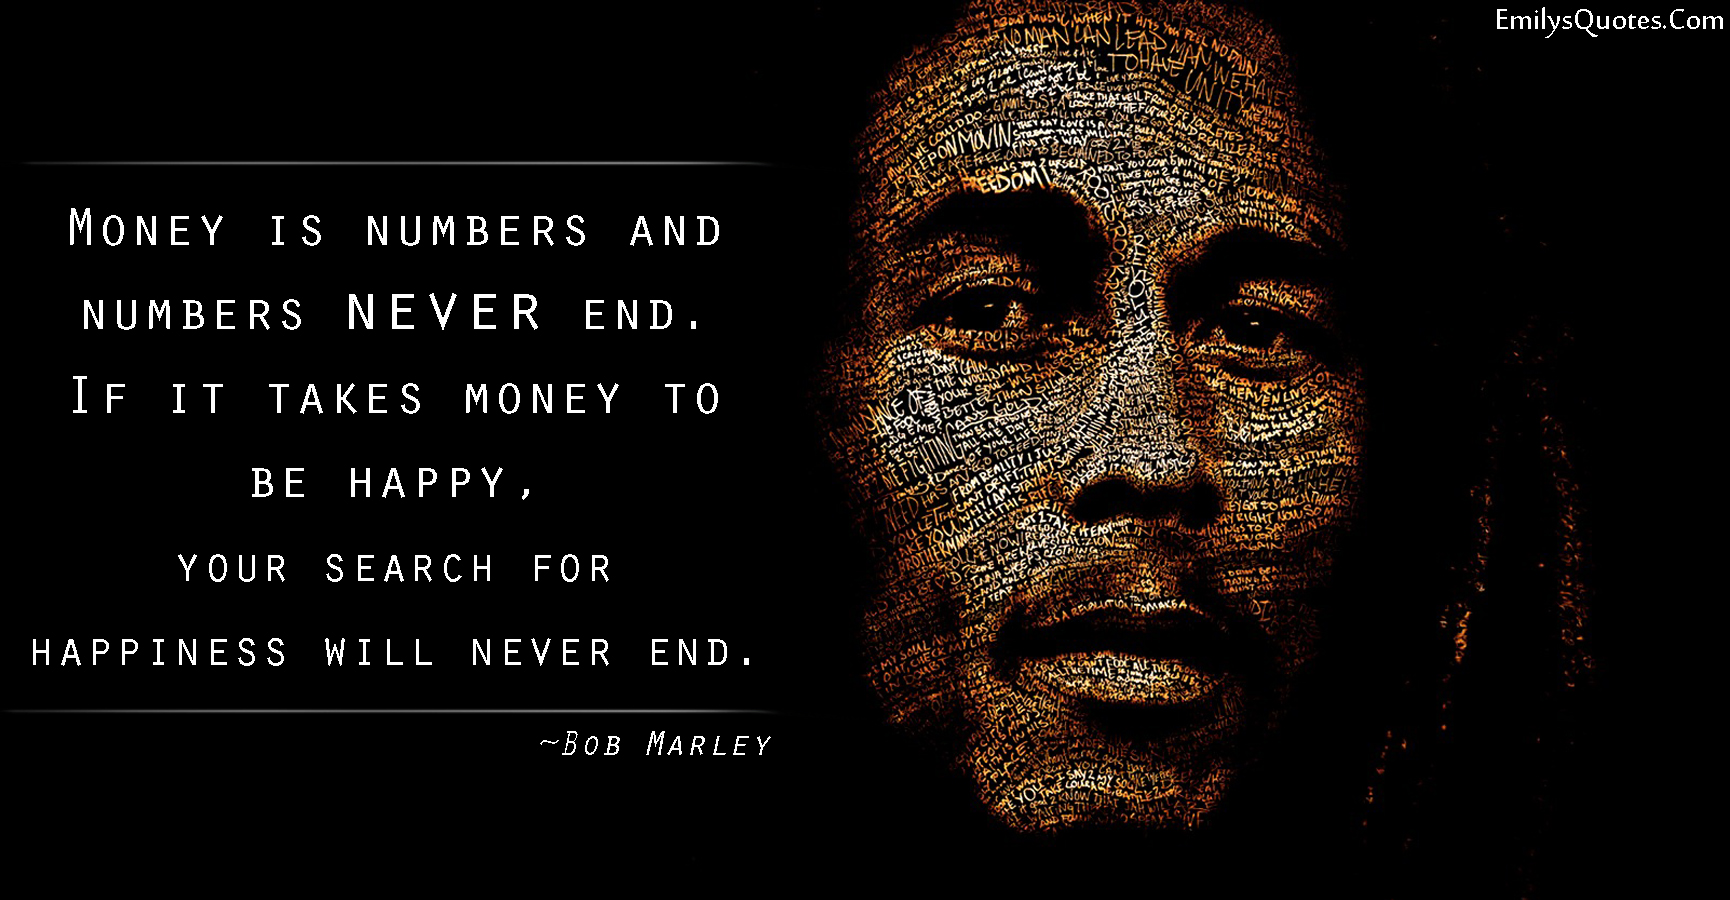 Money is numbers and numbers never end. If it takes money to be happy, your search for happiness will never end